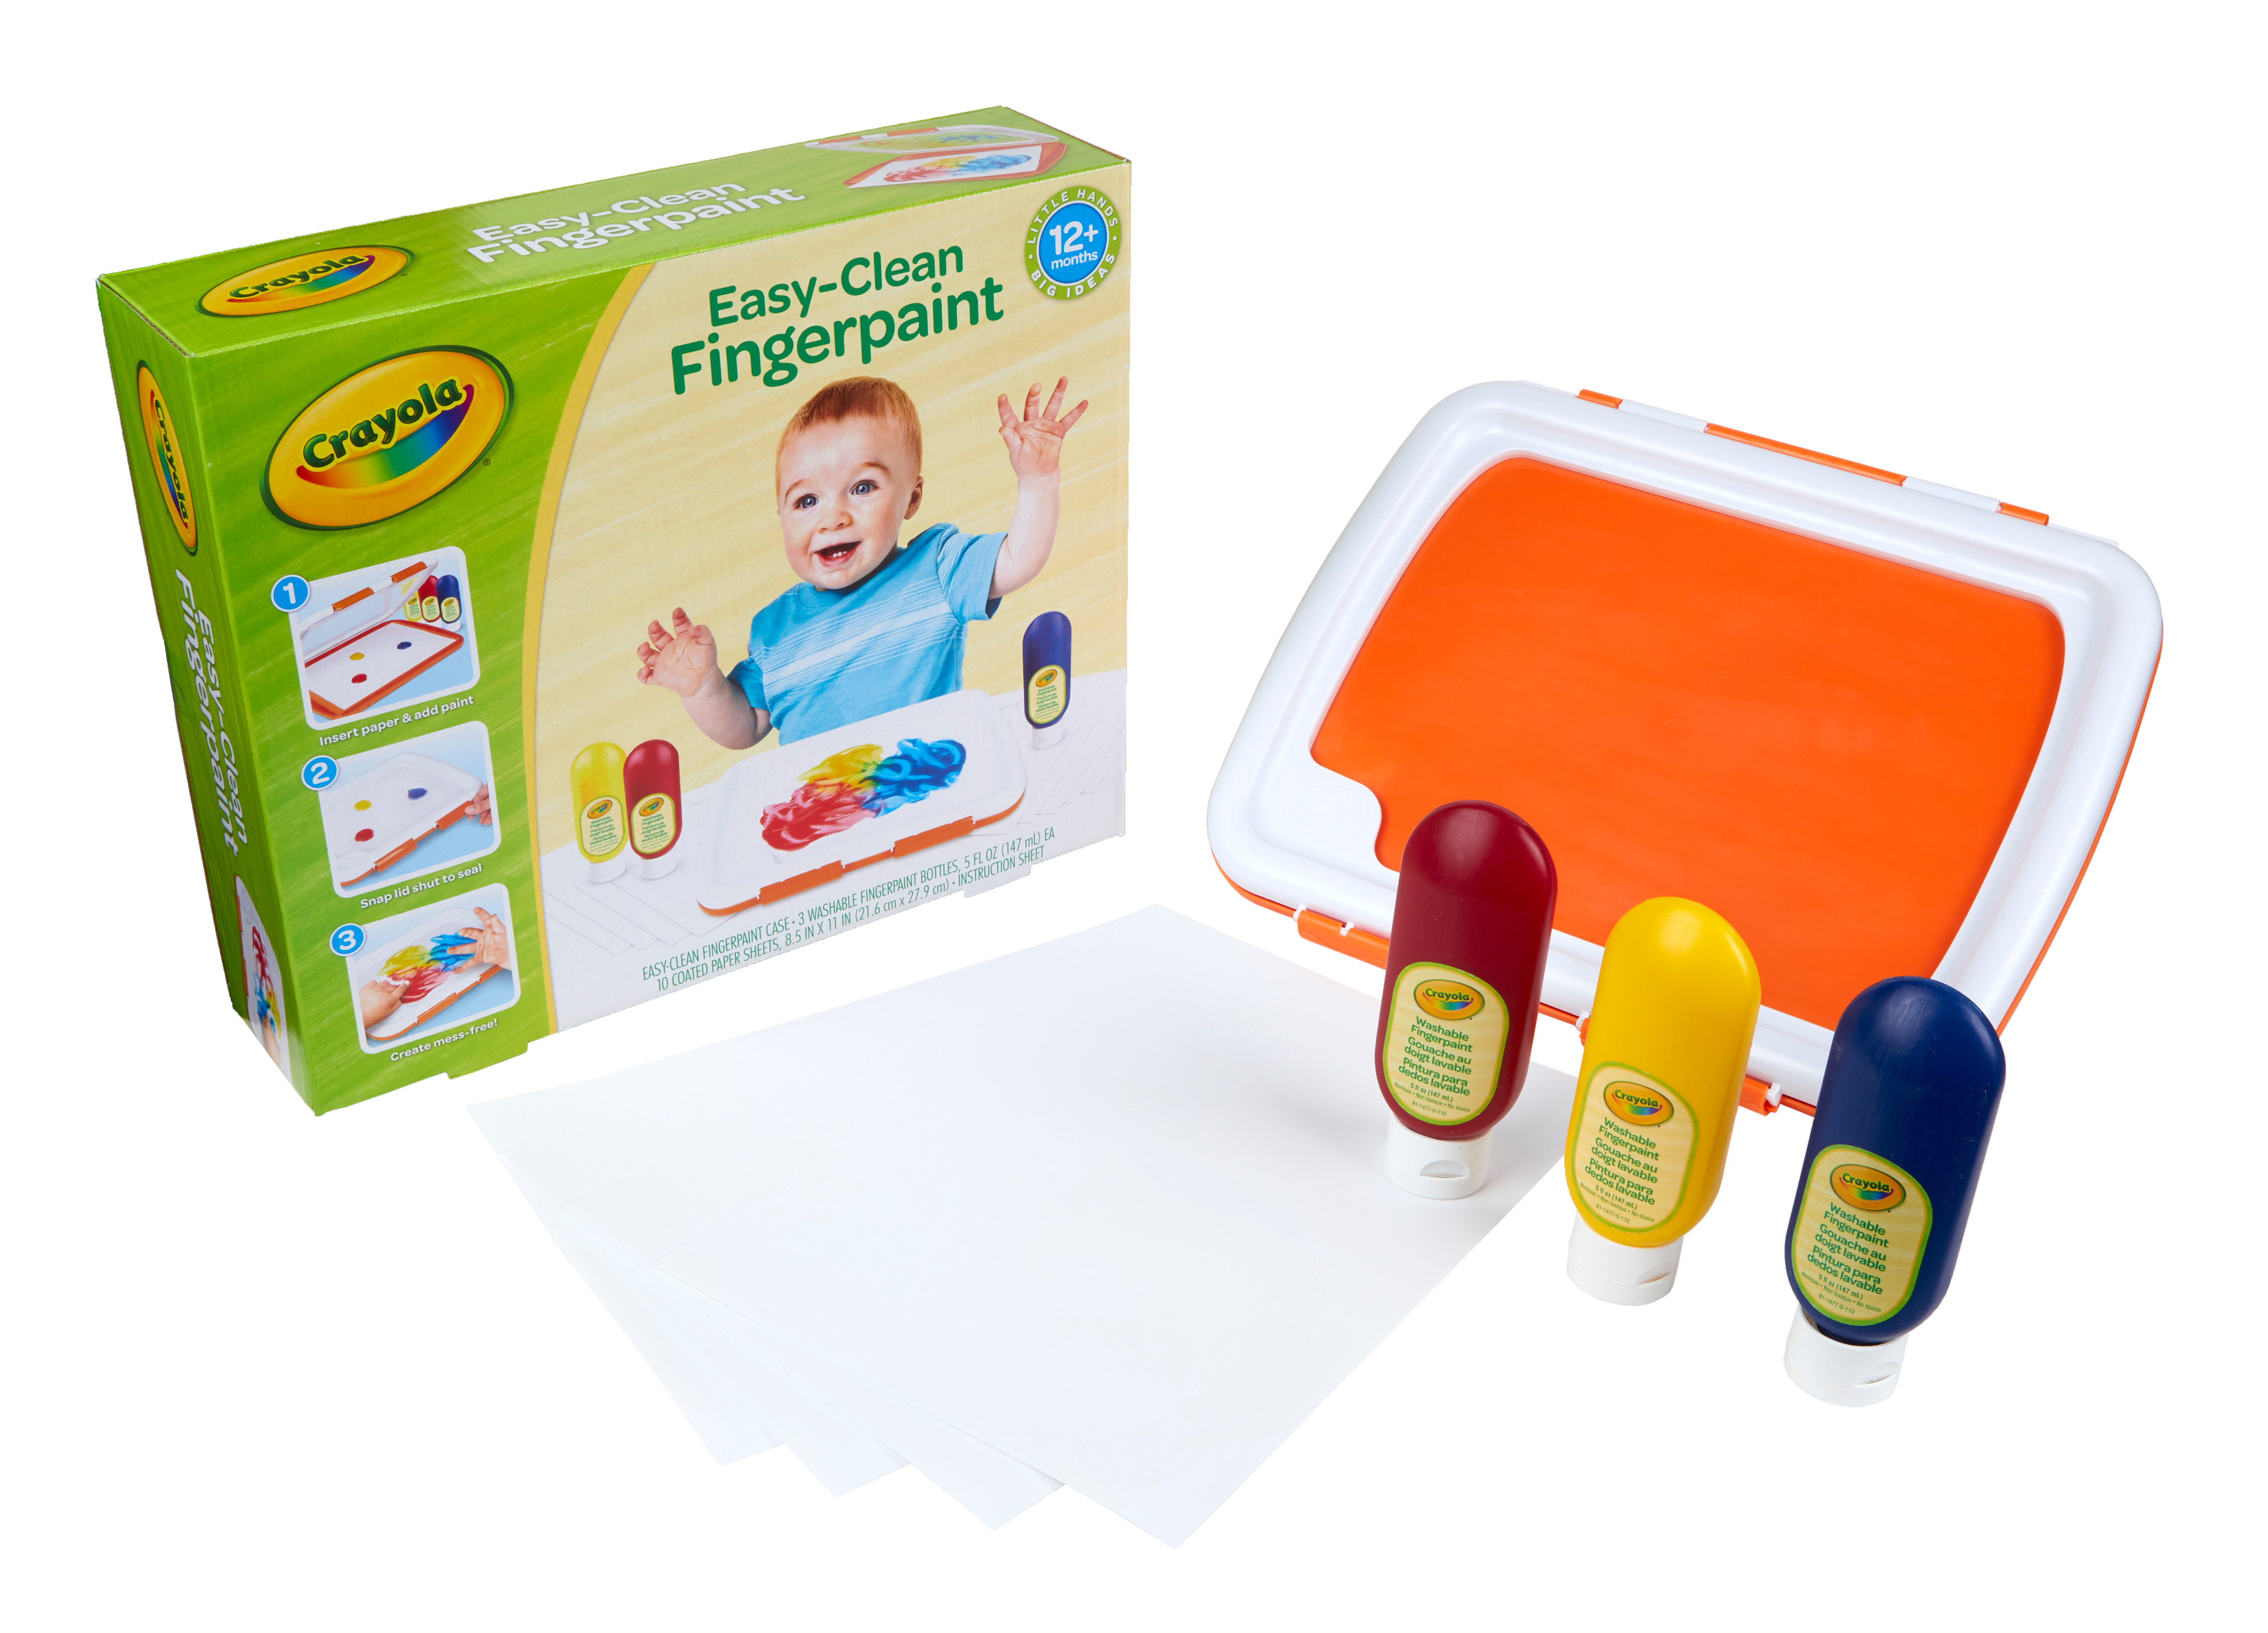 Crayola Washable Finger Paint Station, Less Mess Finger Paints for Toddlers, Gift - image 2 of 9